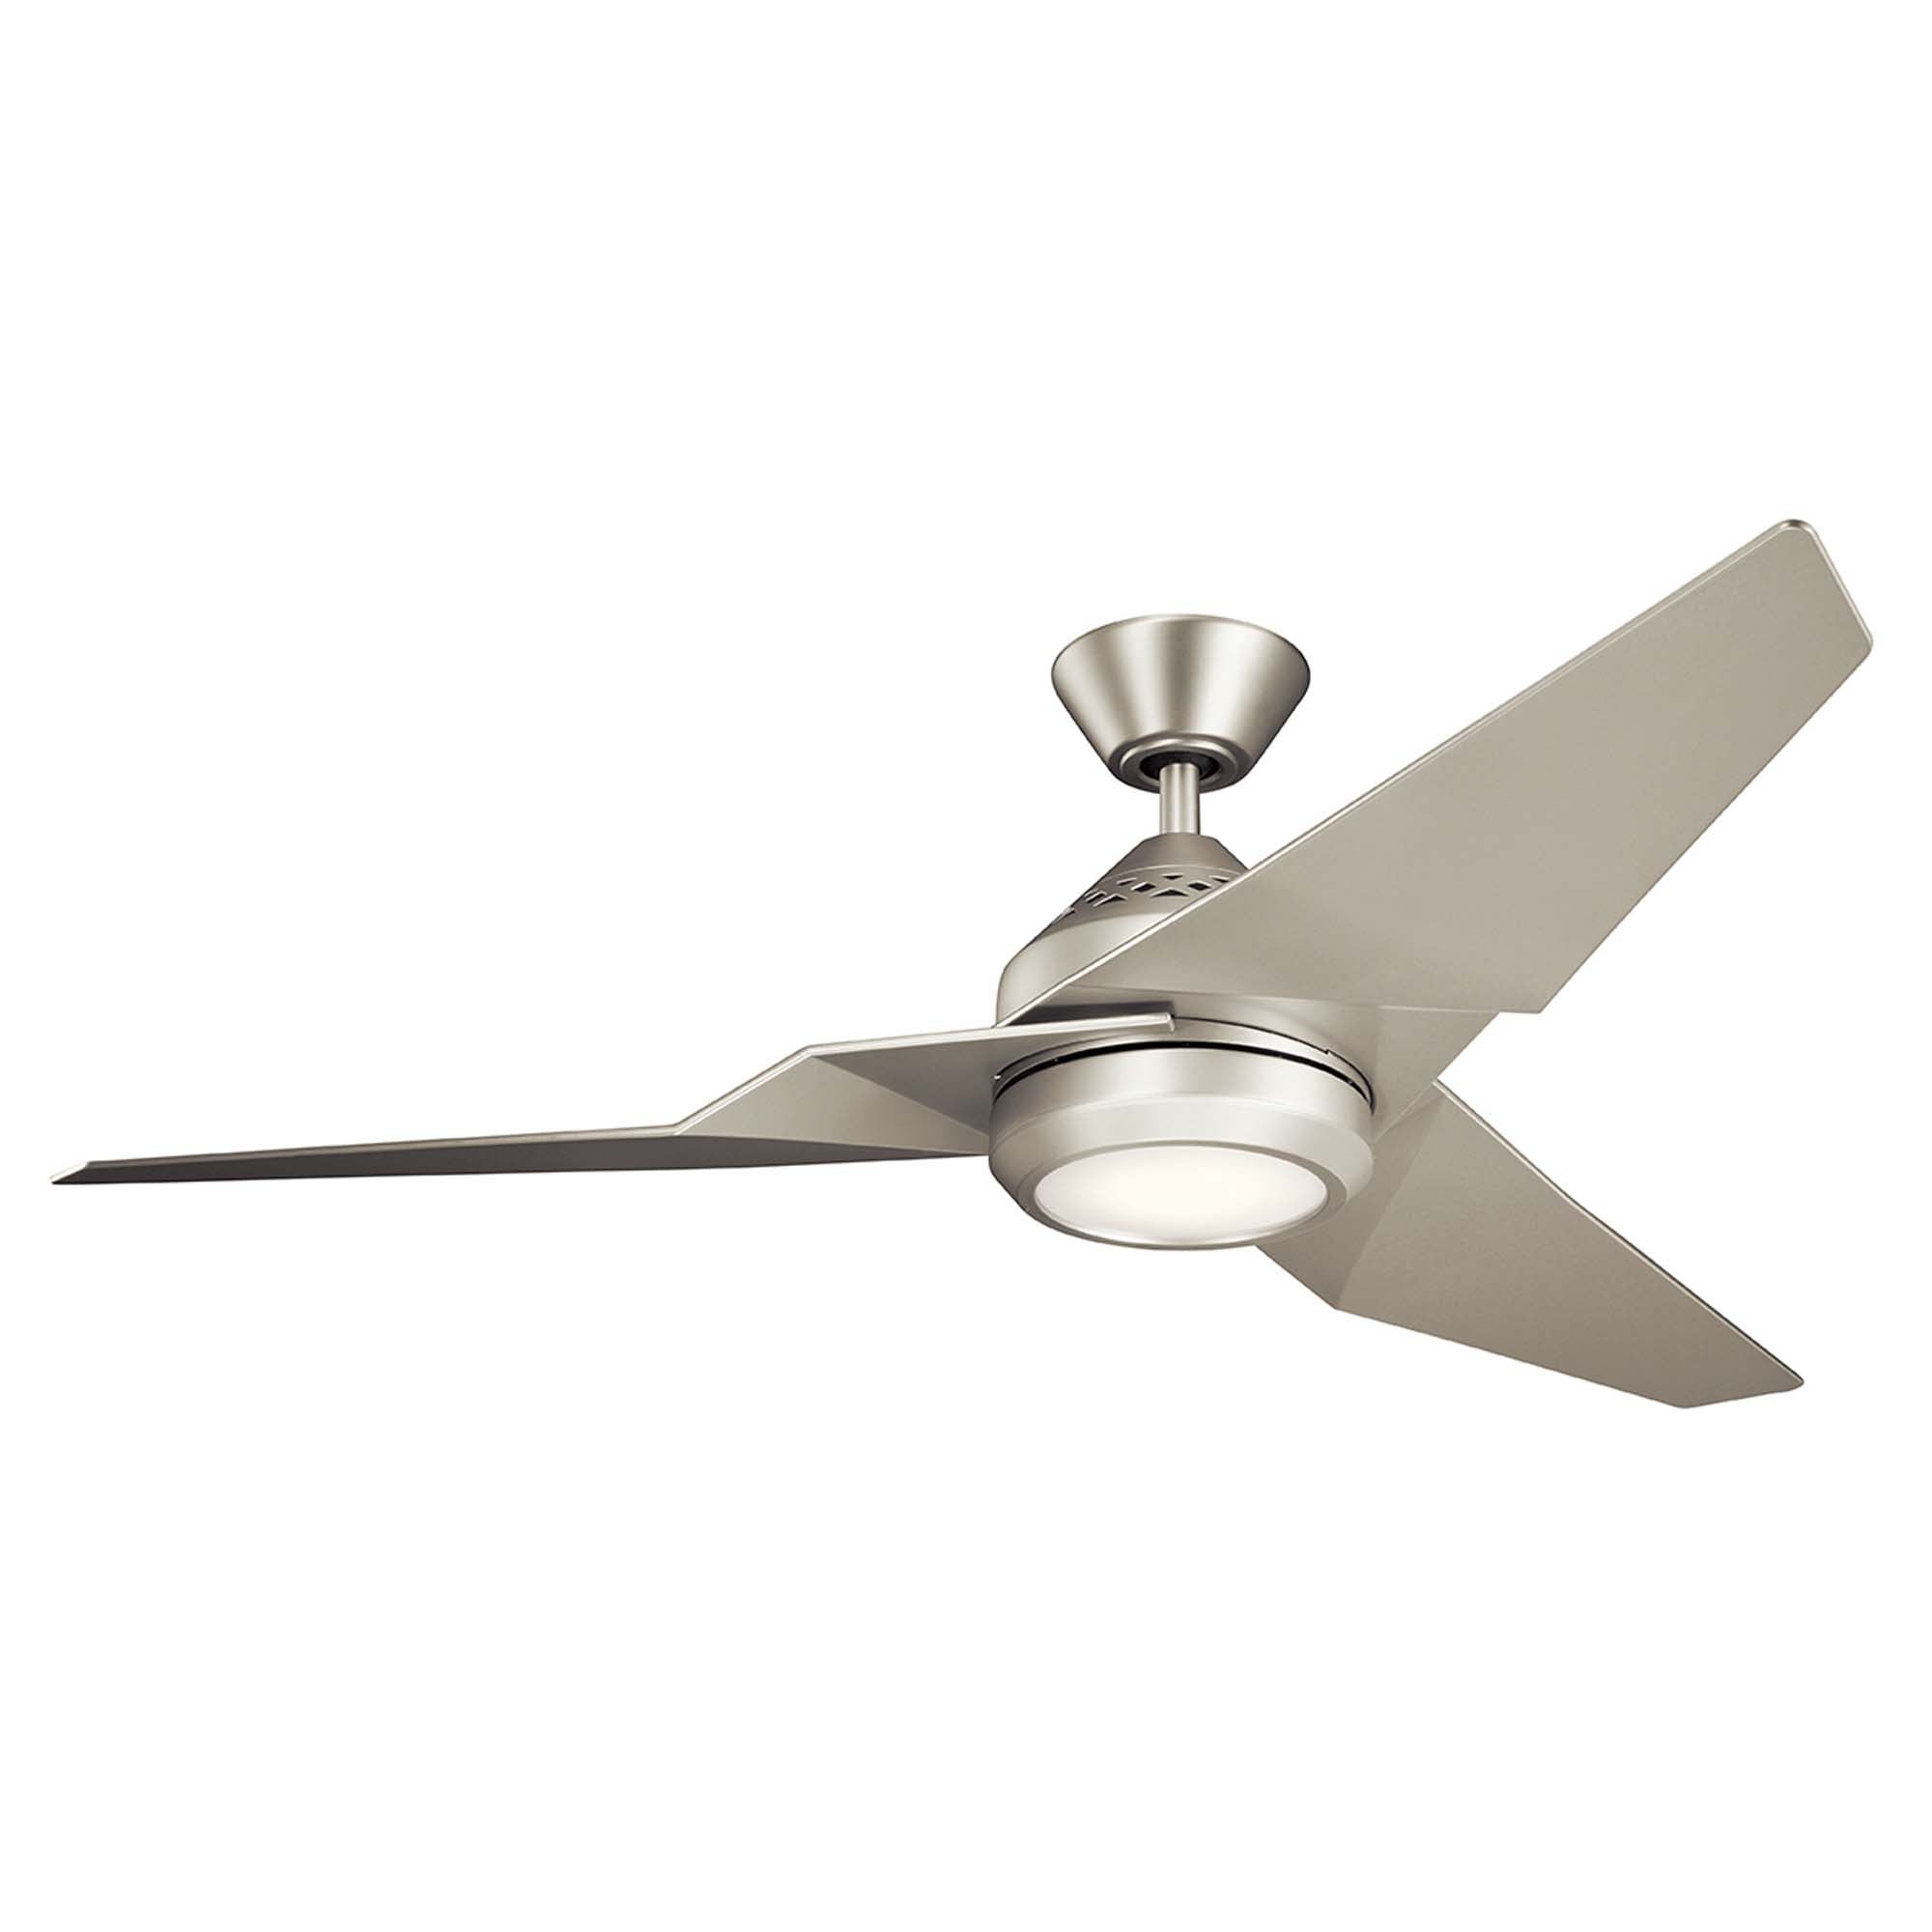 Kichler Jade Ceiling Fan With Light Remote 152cm Silver